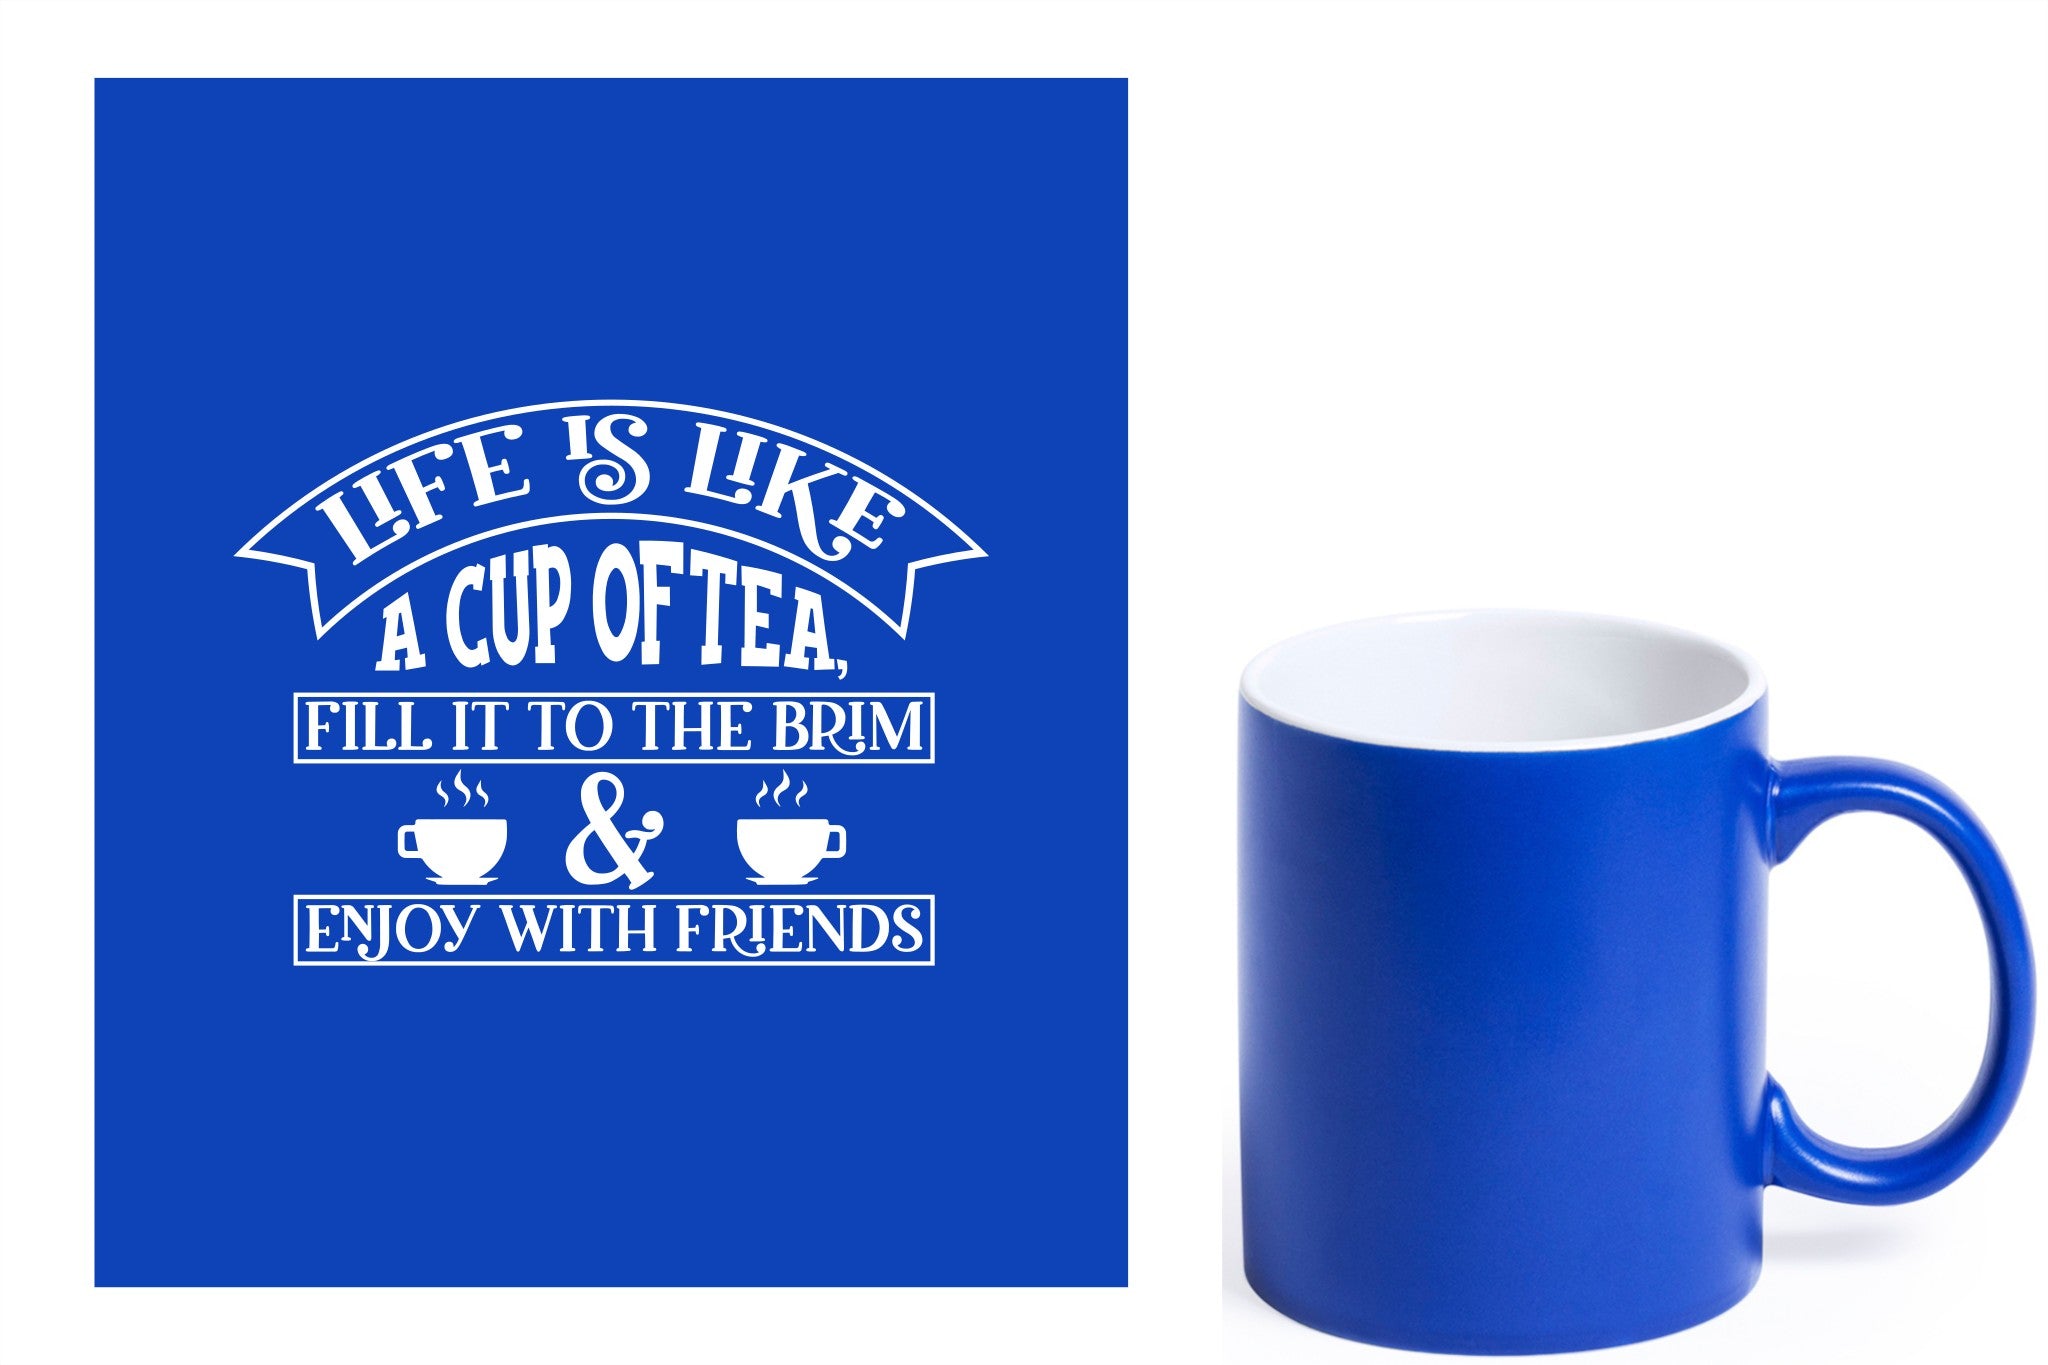 Blauwe keramische mok met witte gravure  'Life is like a cup of tea fill it to the brim & enjoy with friends'.